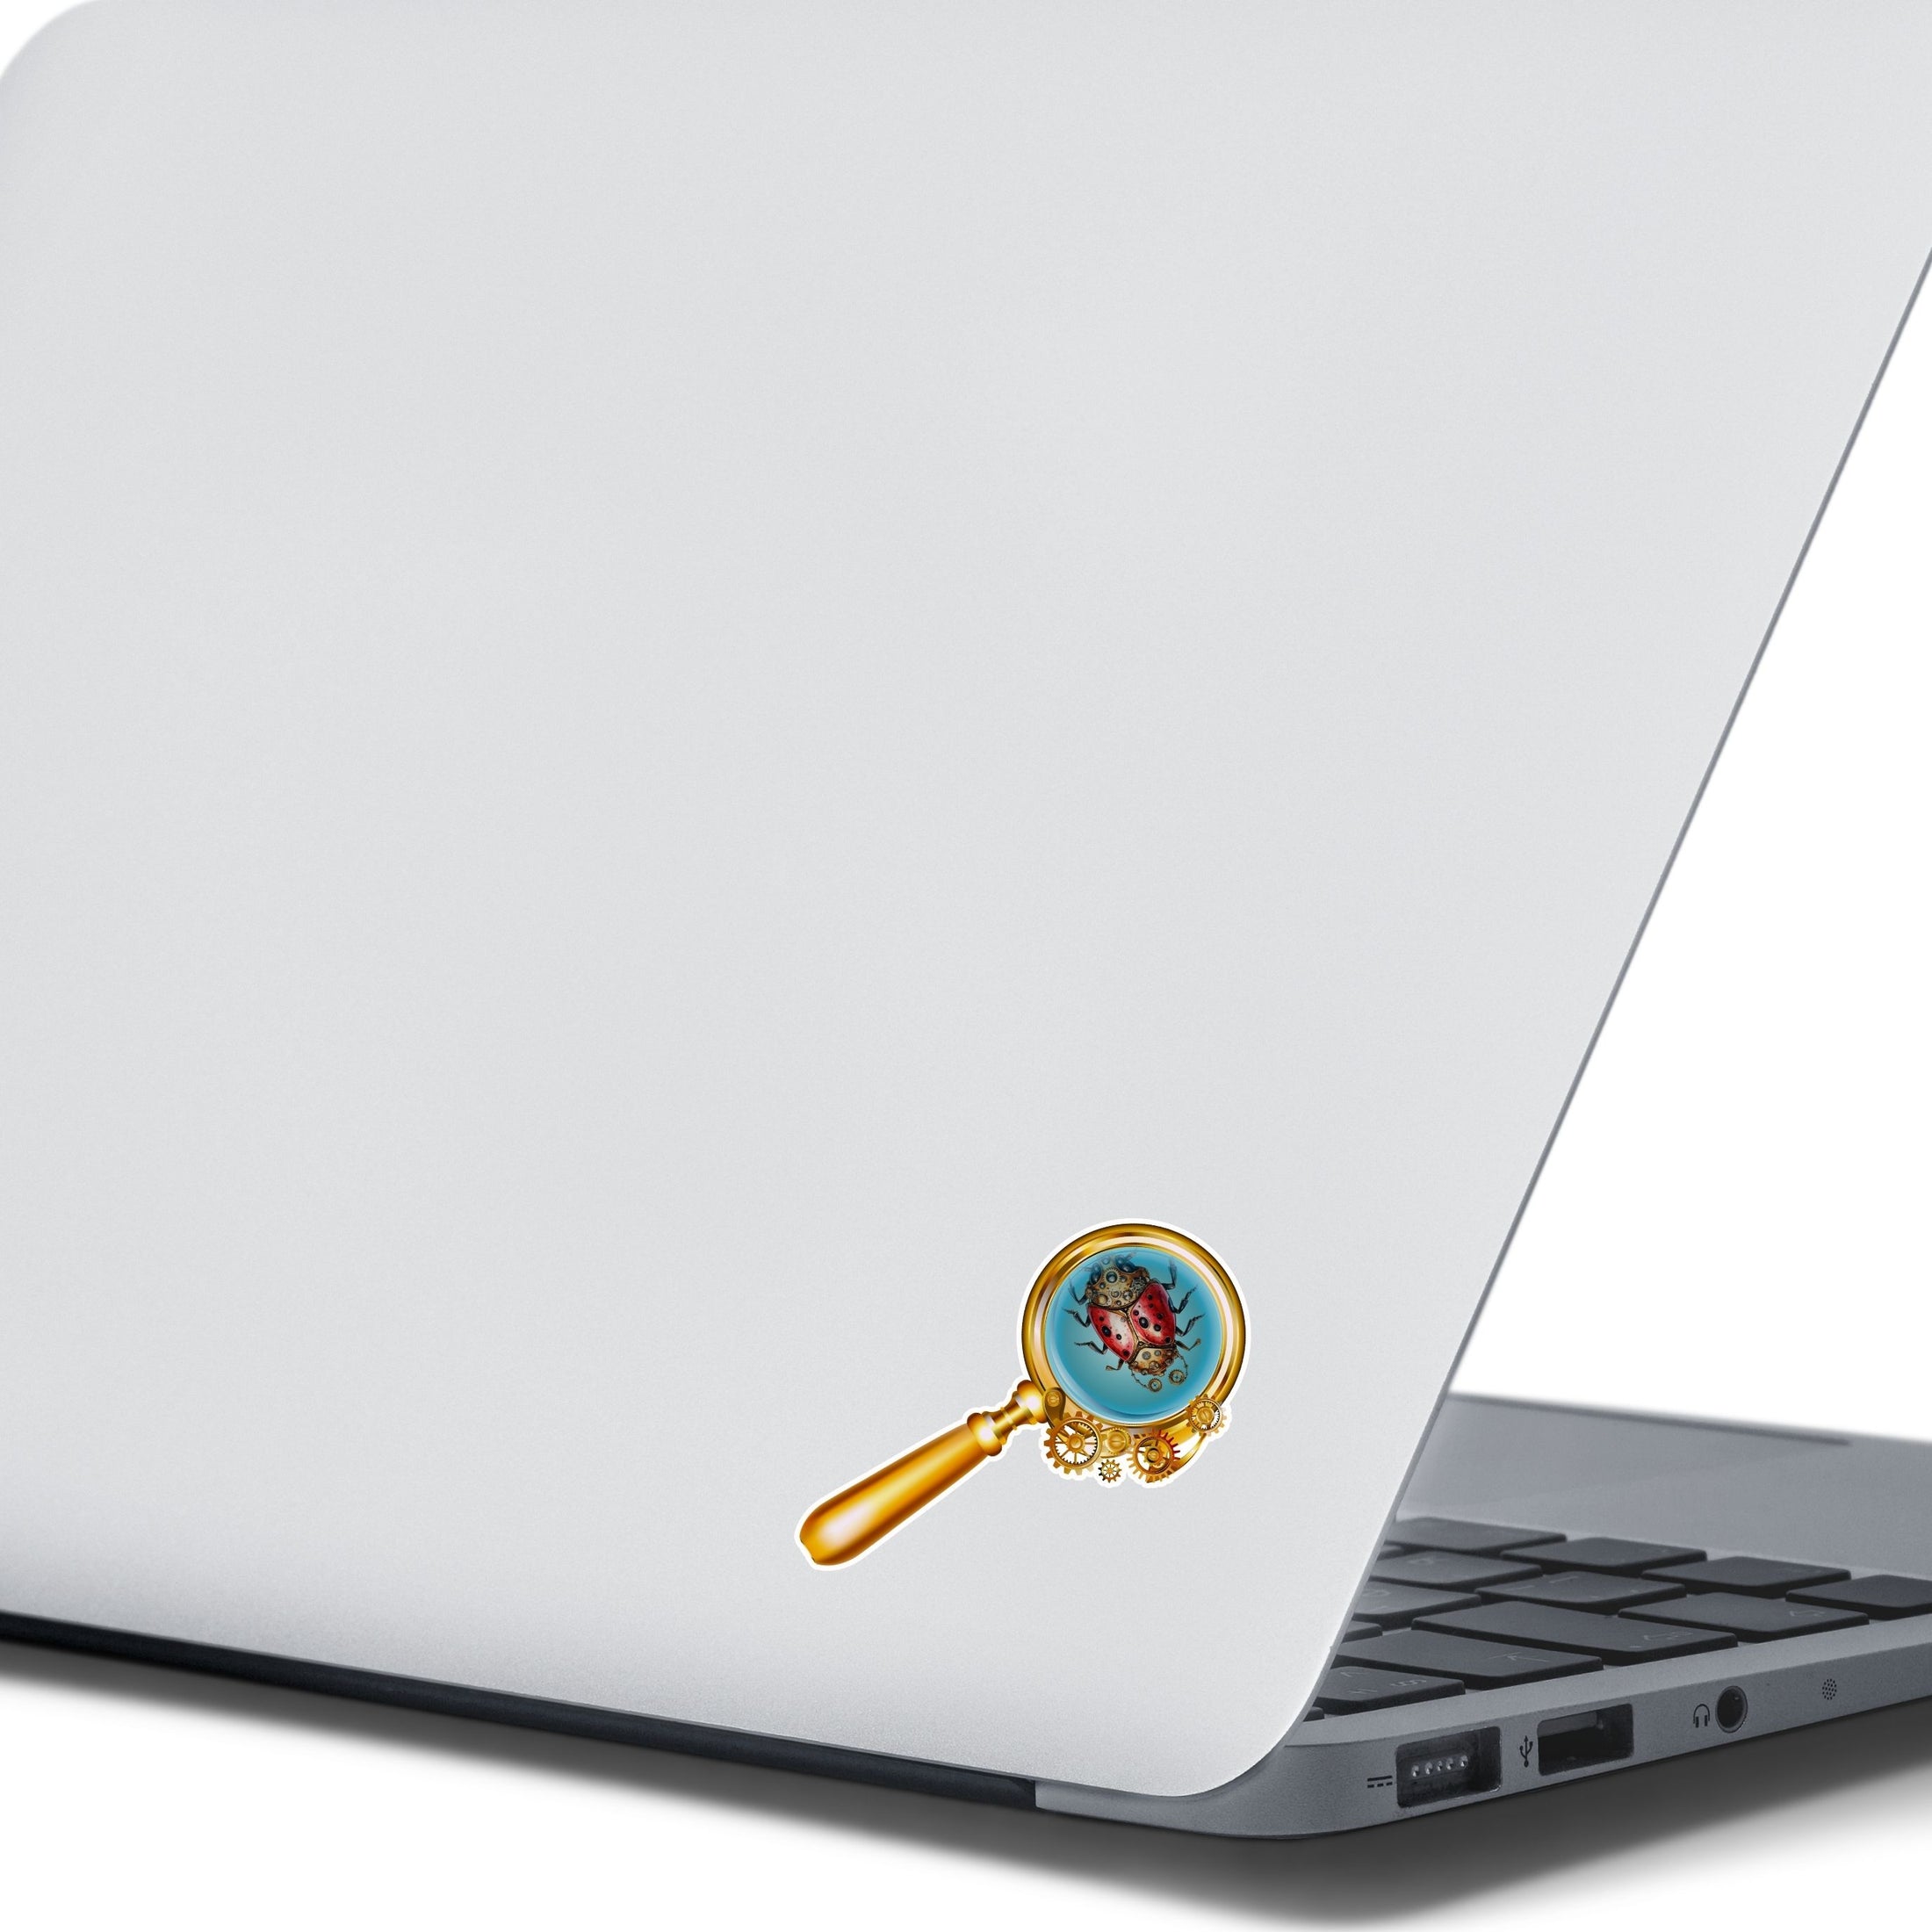 This image shows the steampunk ladybug sticker on the back of an open laptop.